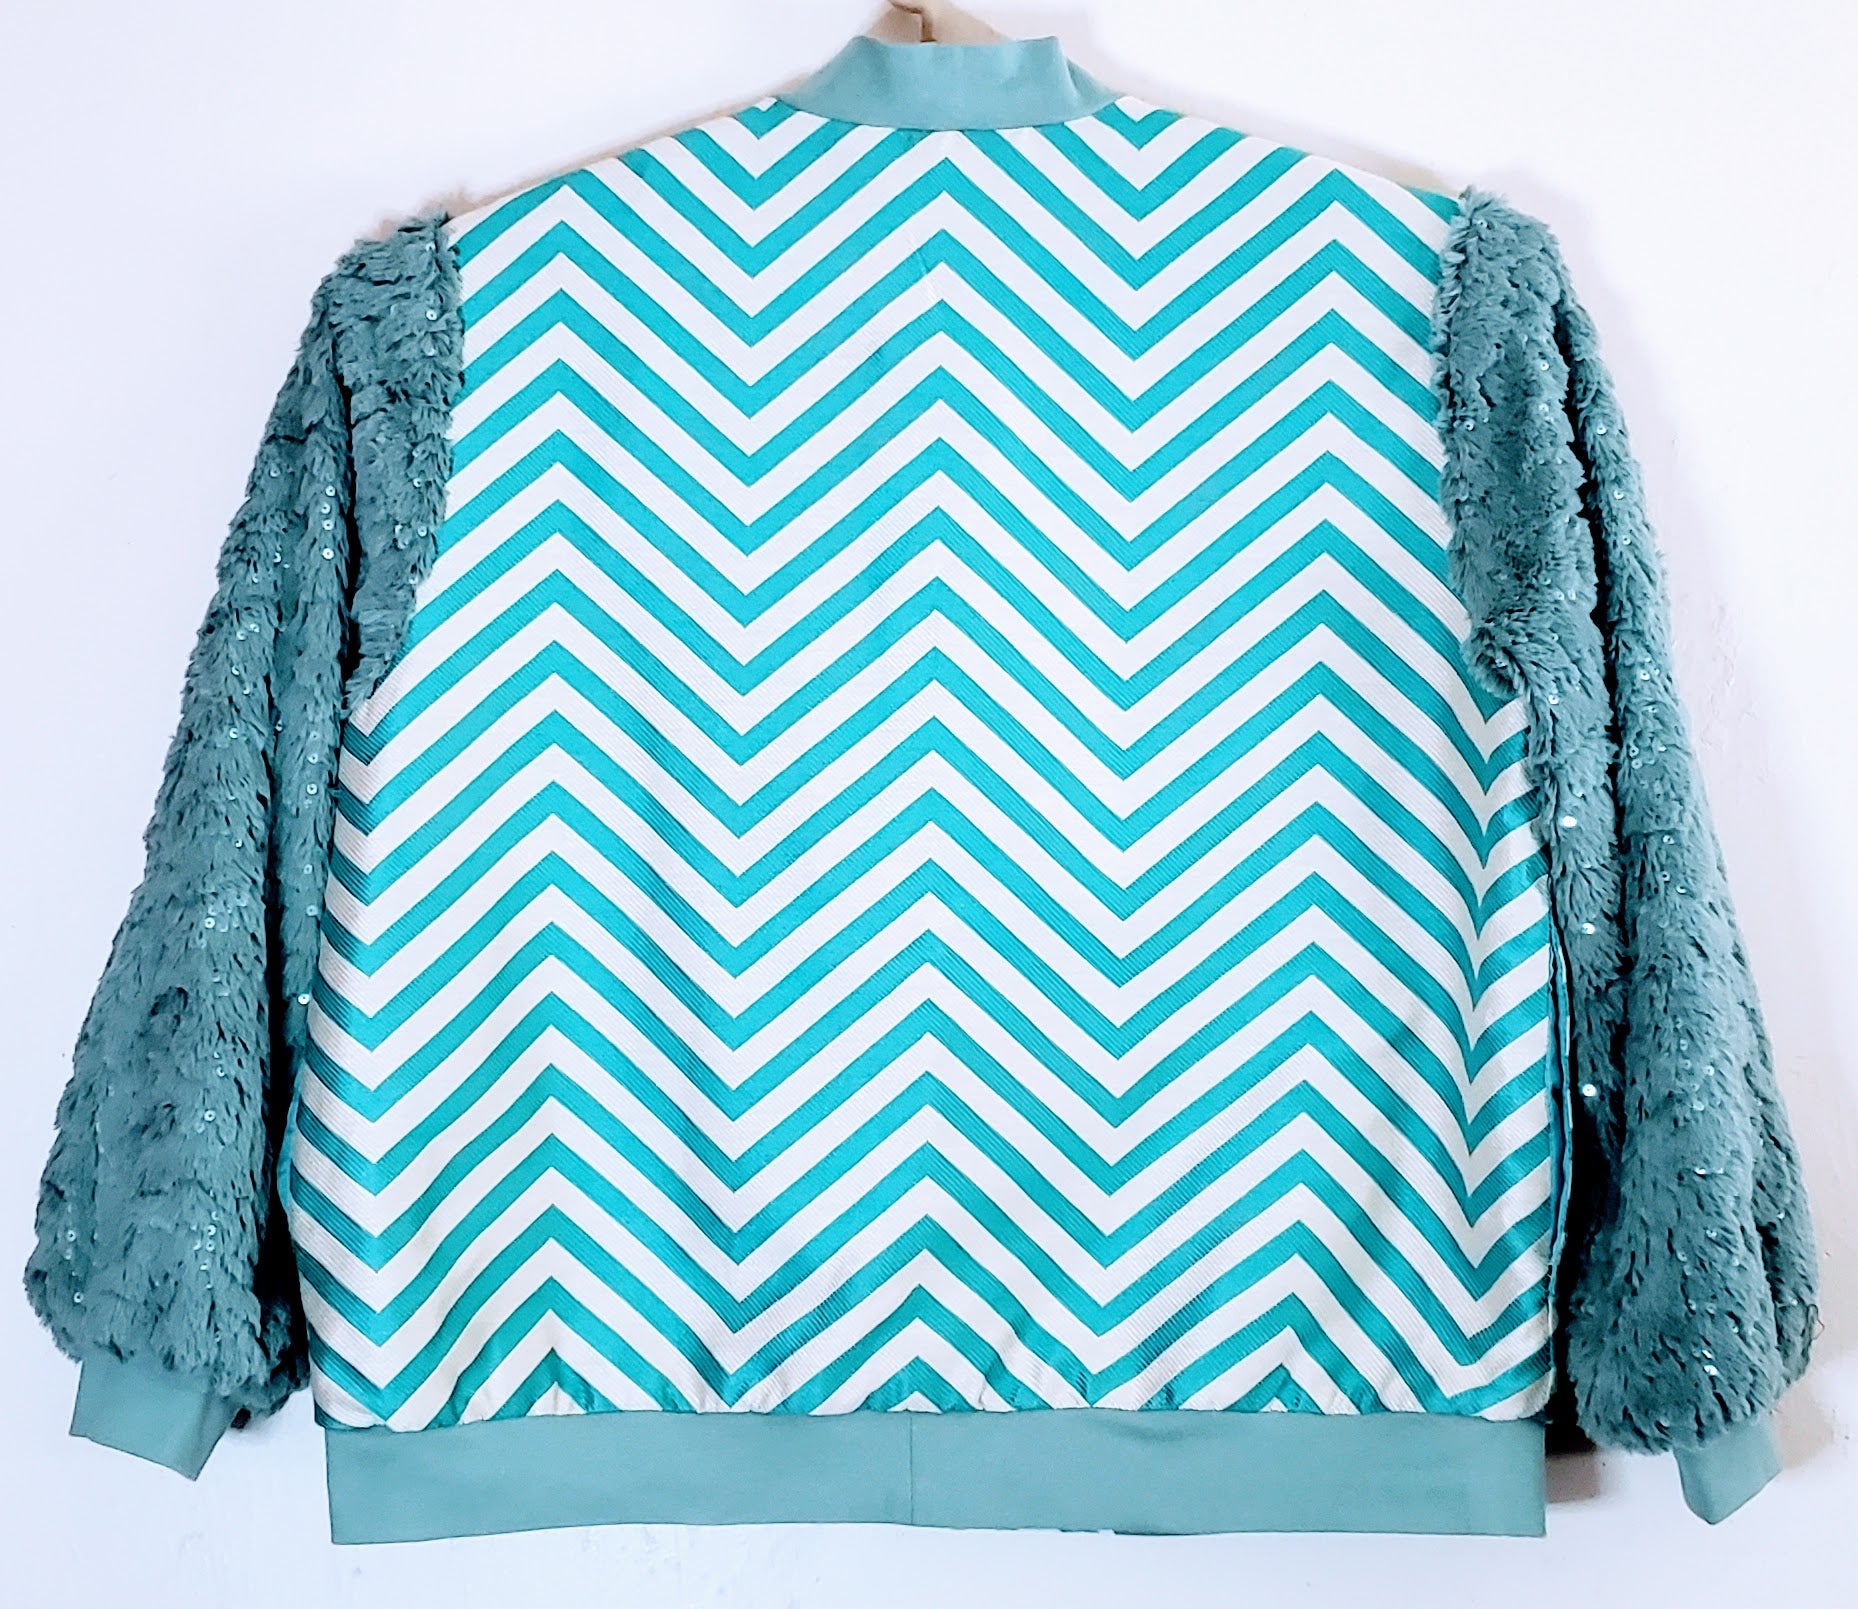 Back view of Turquoise chevron print bomber jacket with sequined fur sleeves